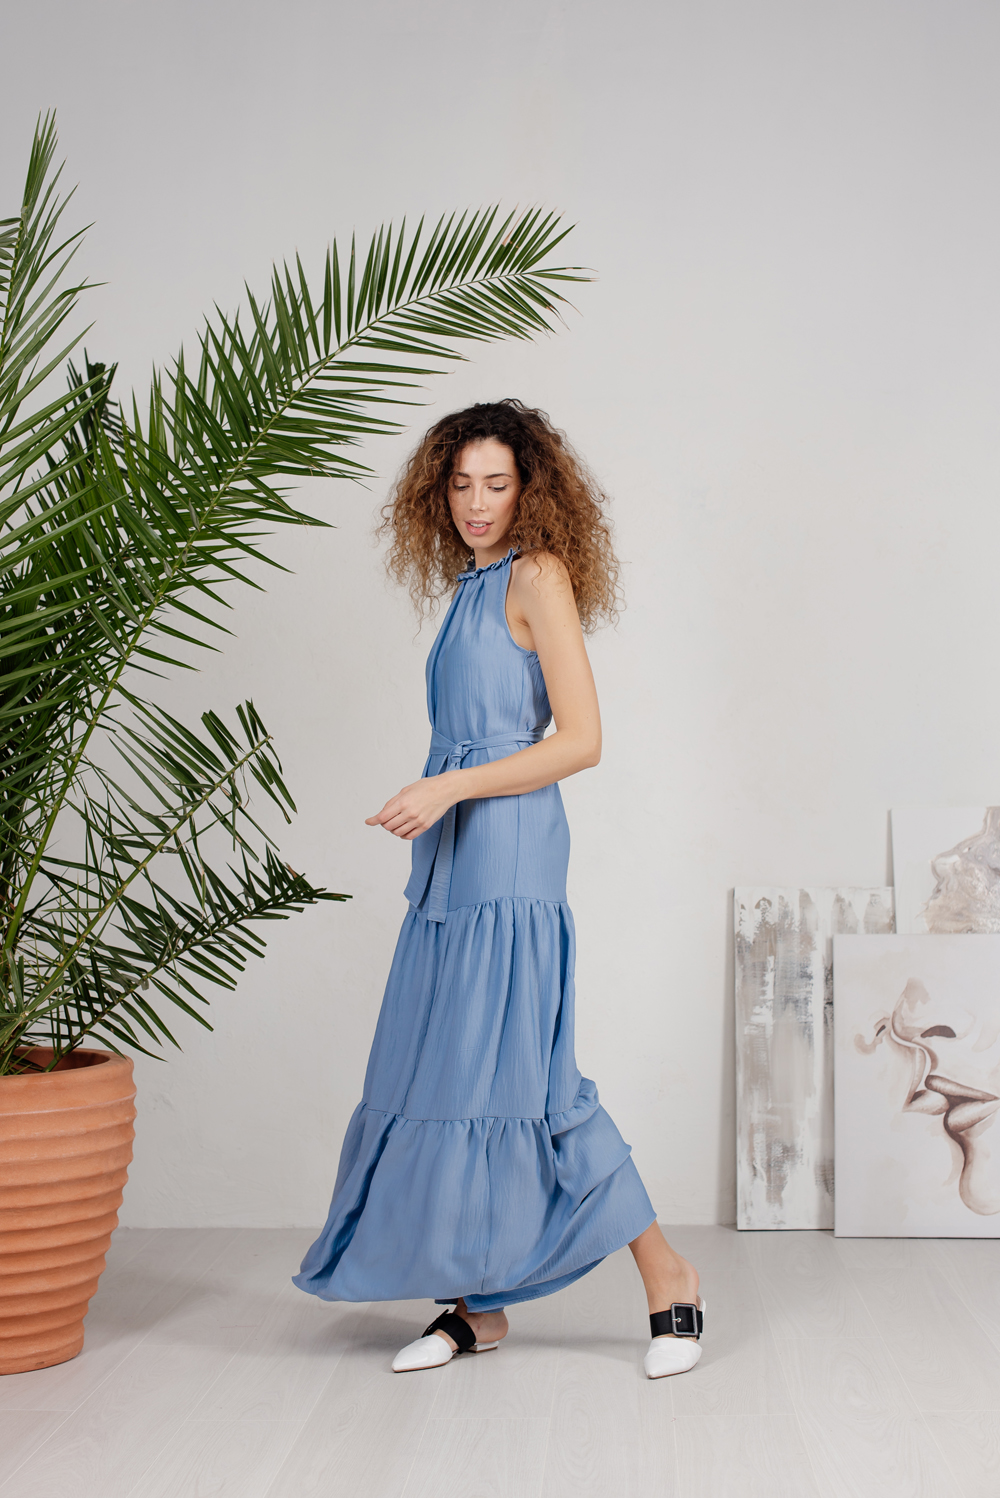 Blue tiered floor-length dress with ties